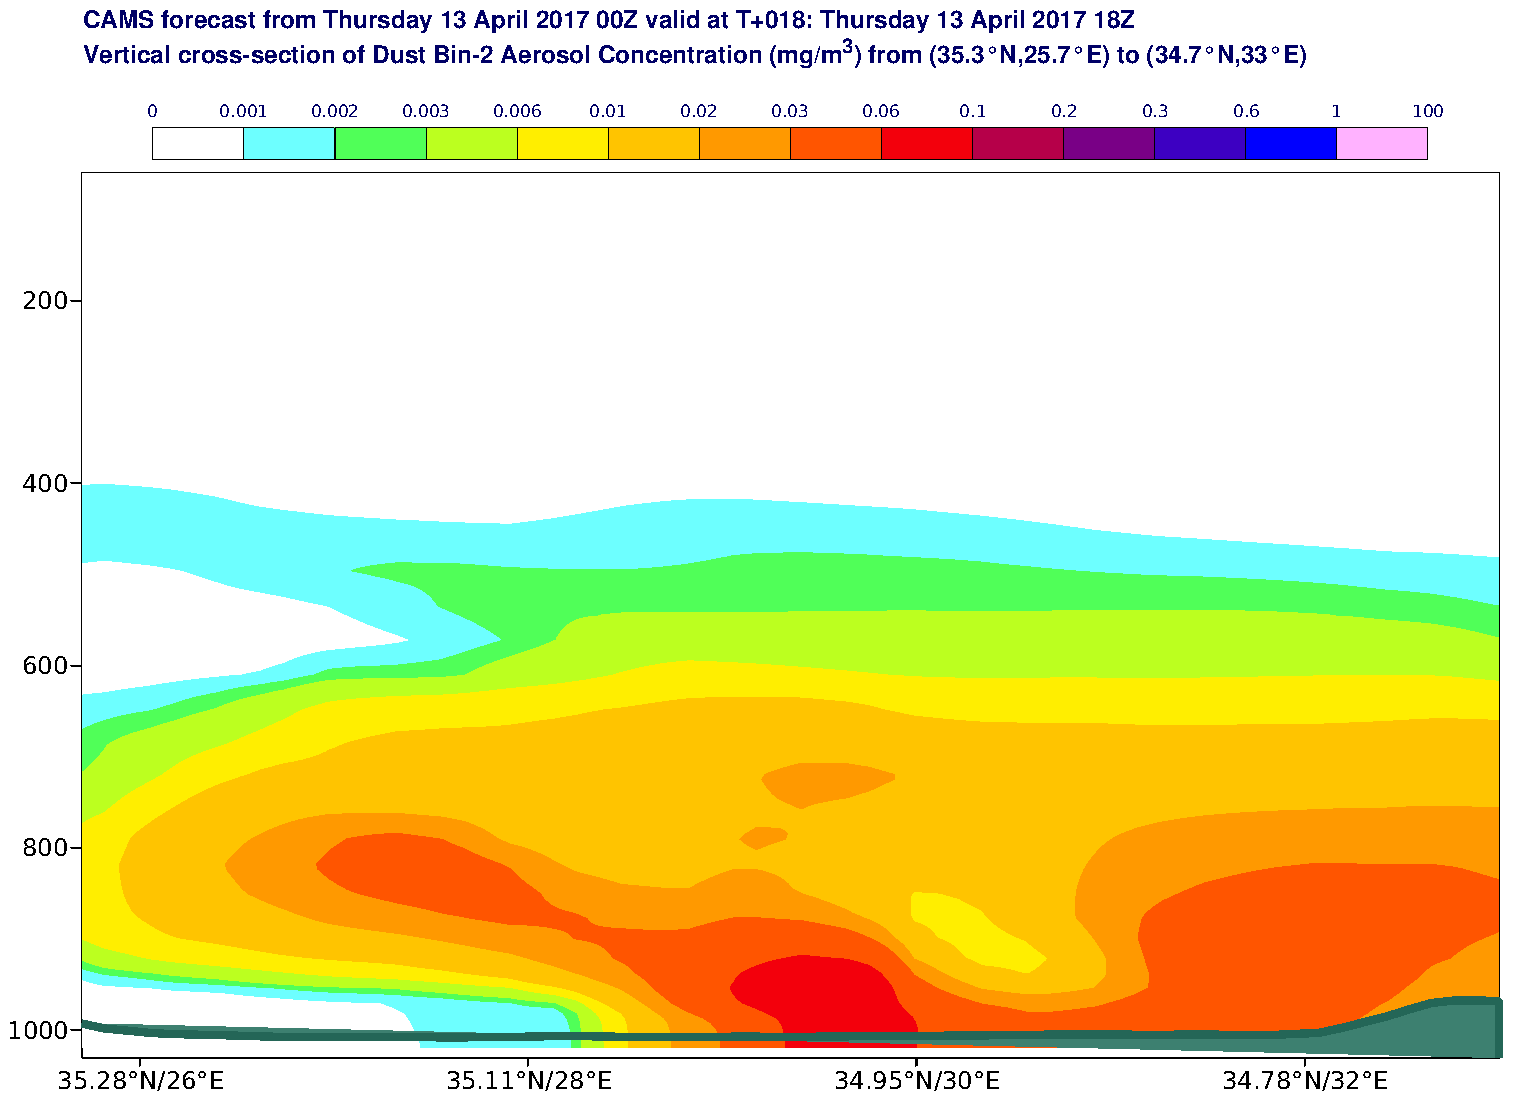 Vertical cross-section of Dust Bin-2 Aerosol Concentration (mg/m3) valid at T18 - 2017-04-13 18:00